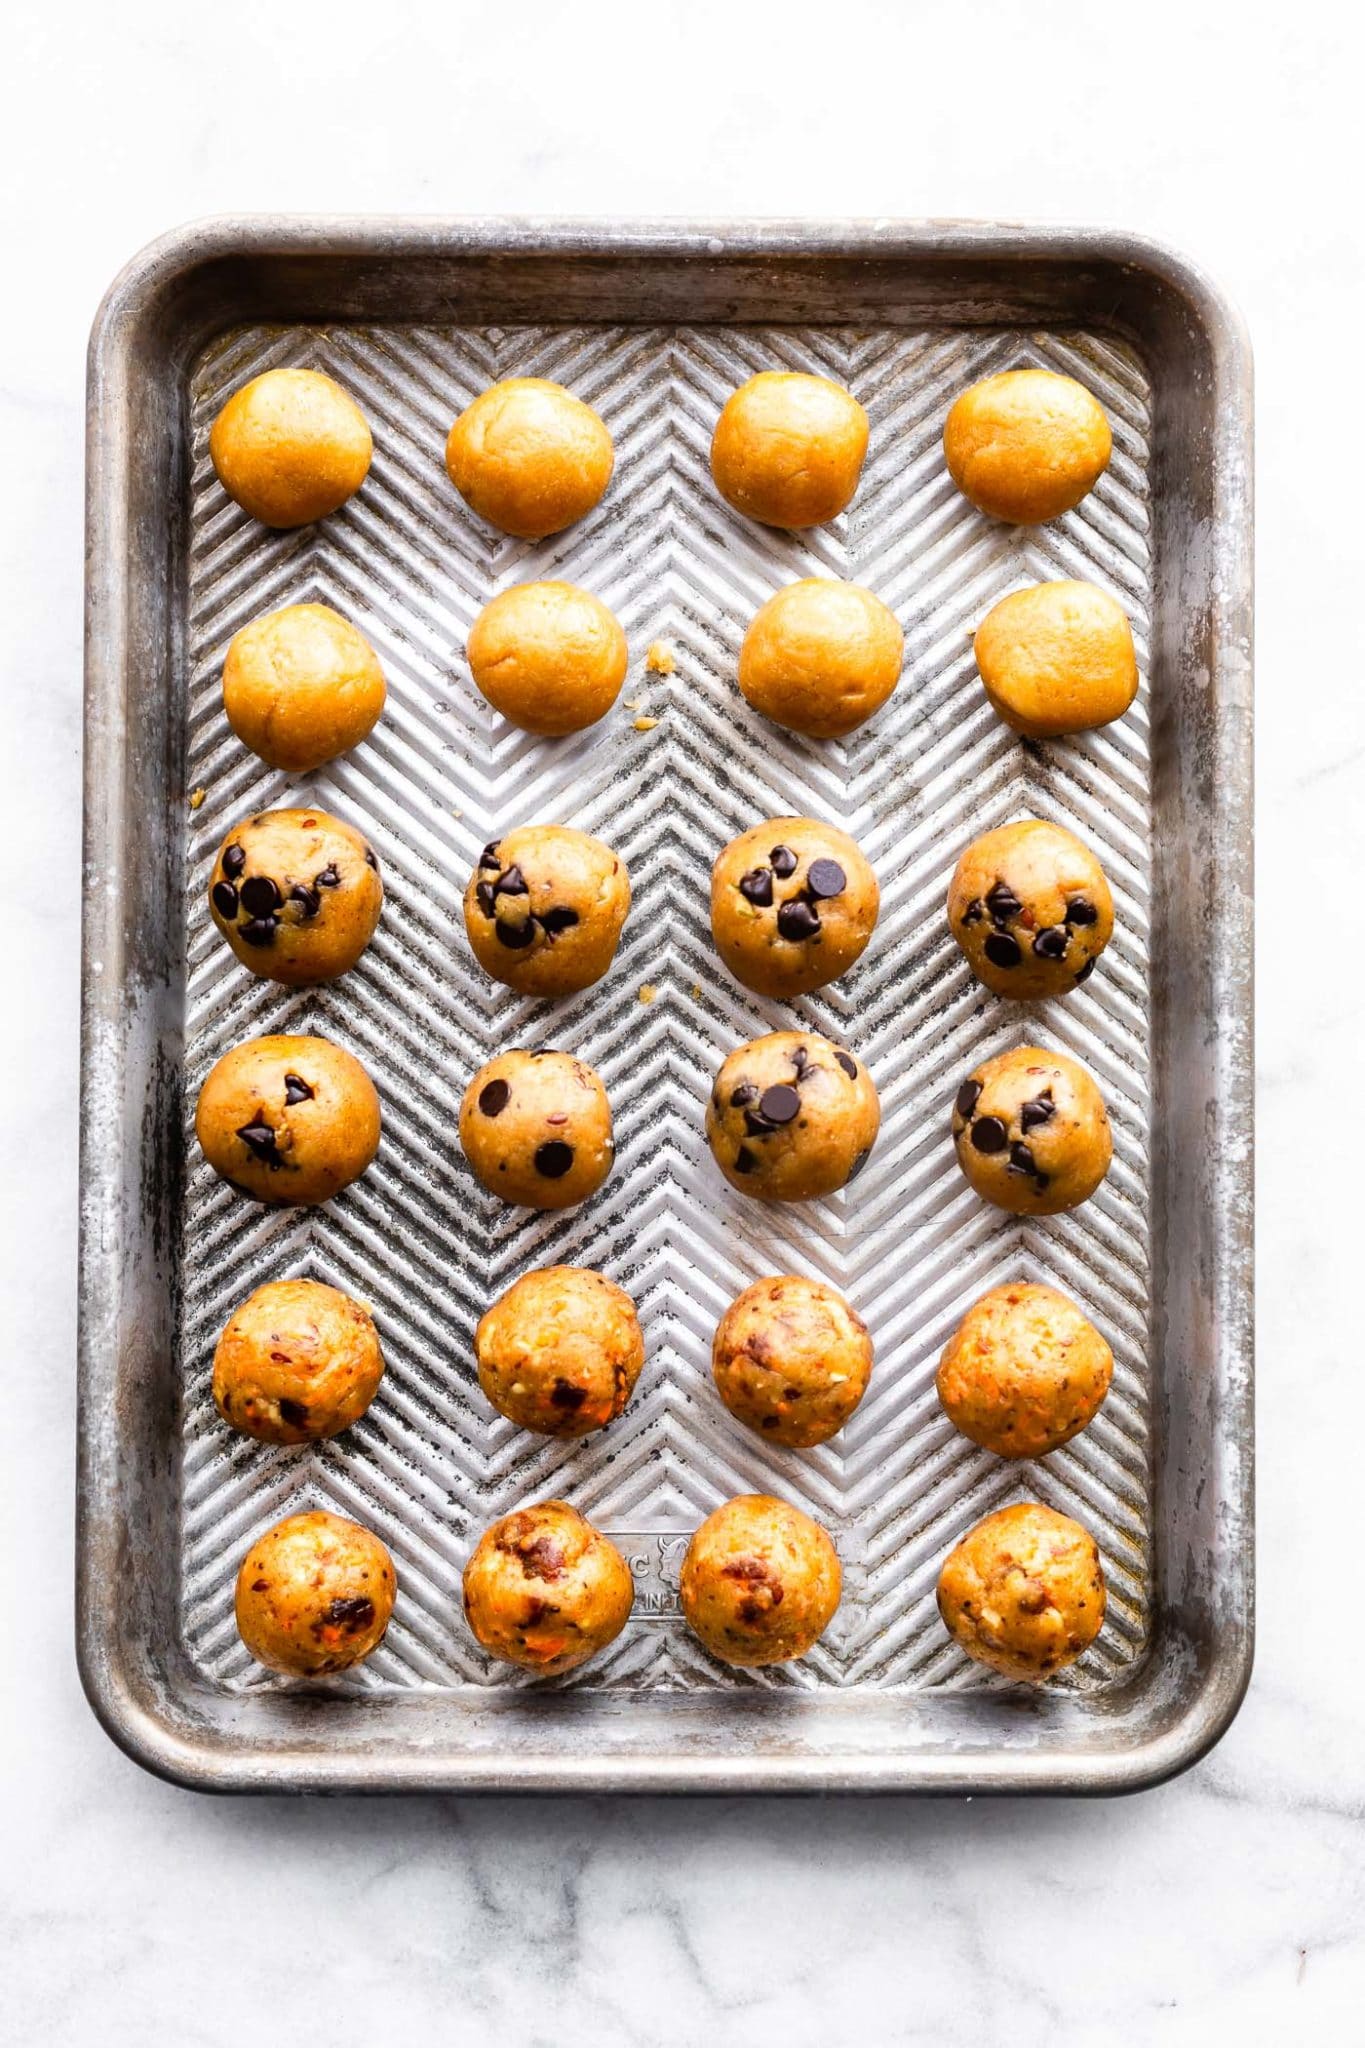 chocolate chip, carrot cake, and vanilla cake balls on a baking sheet before being coated with chocolate